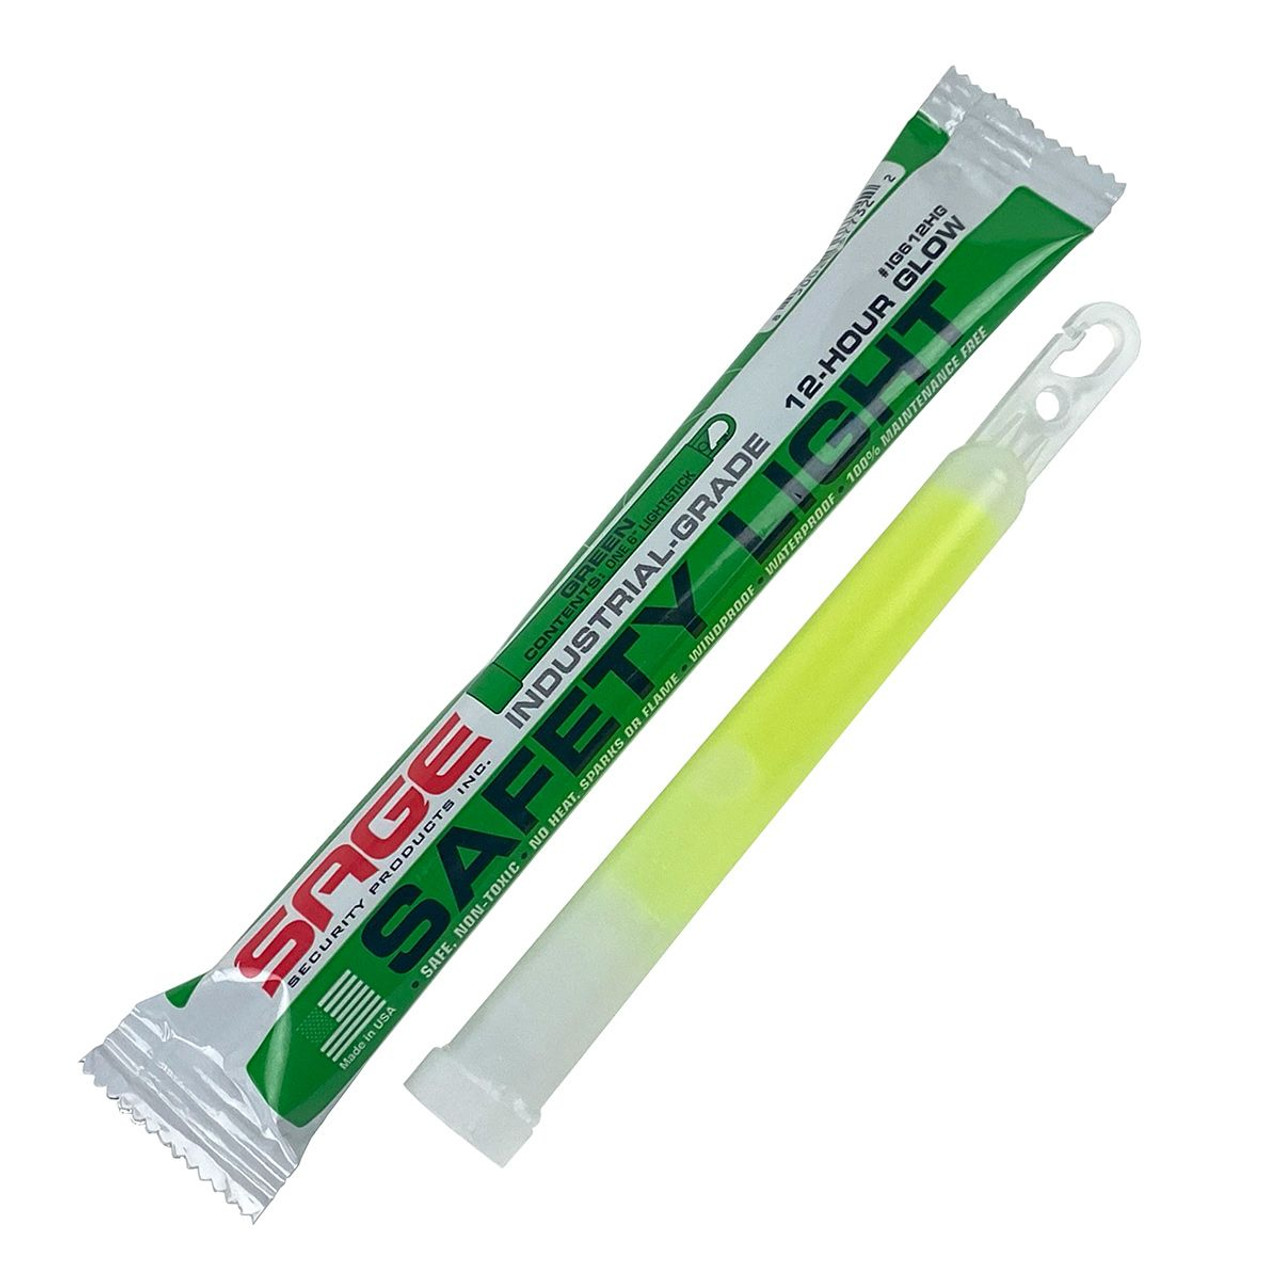 10 Safety Glow Sticks with Marker Stands